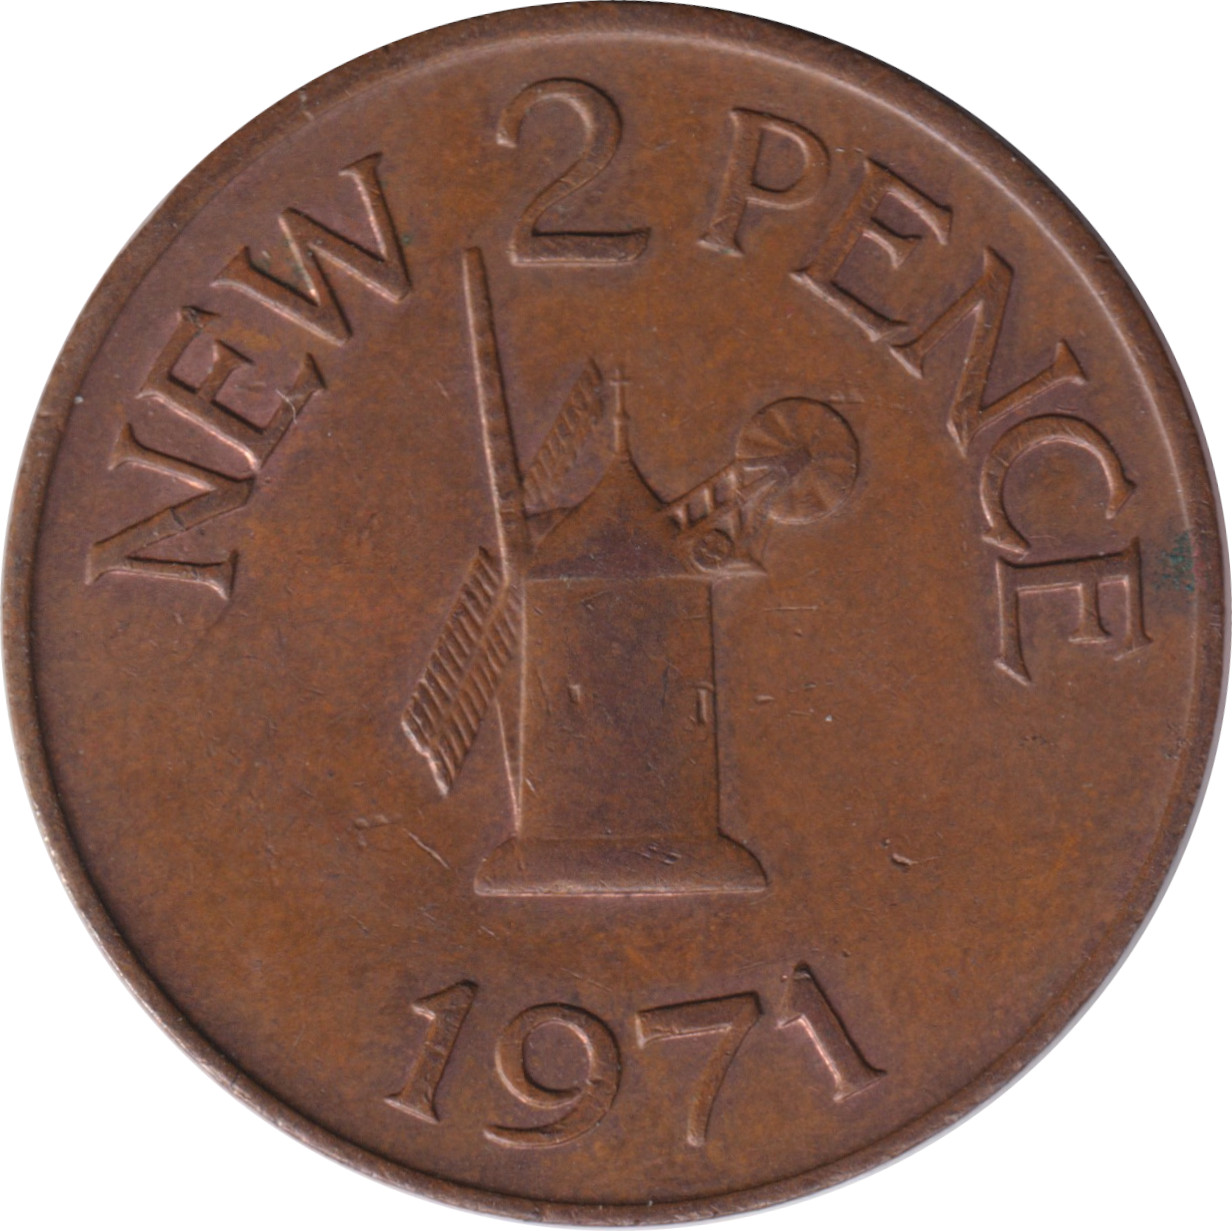 2 pence - Moulin - New pence